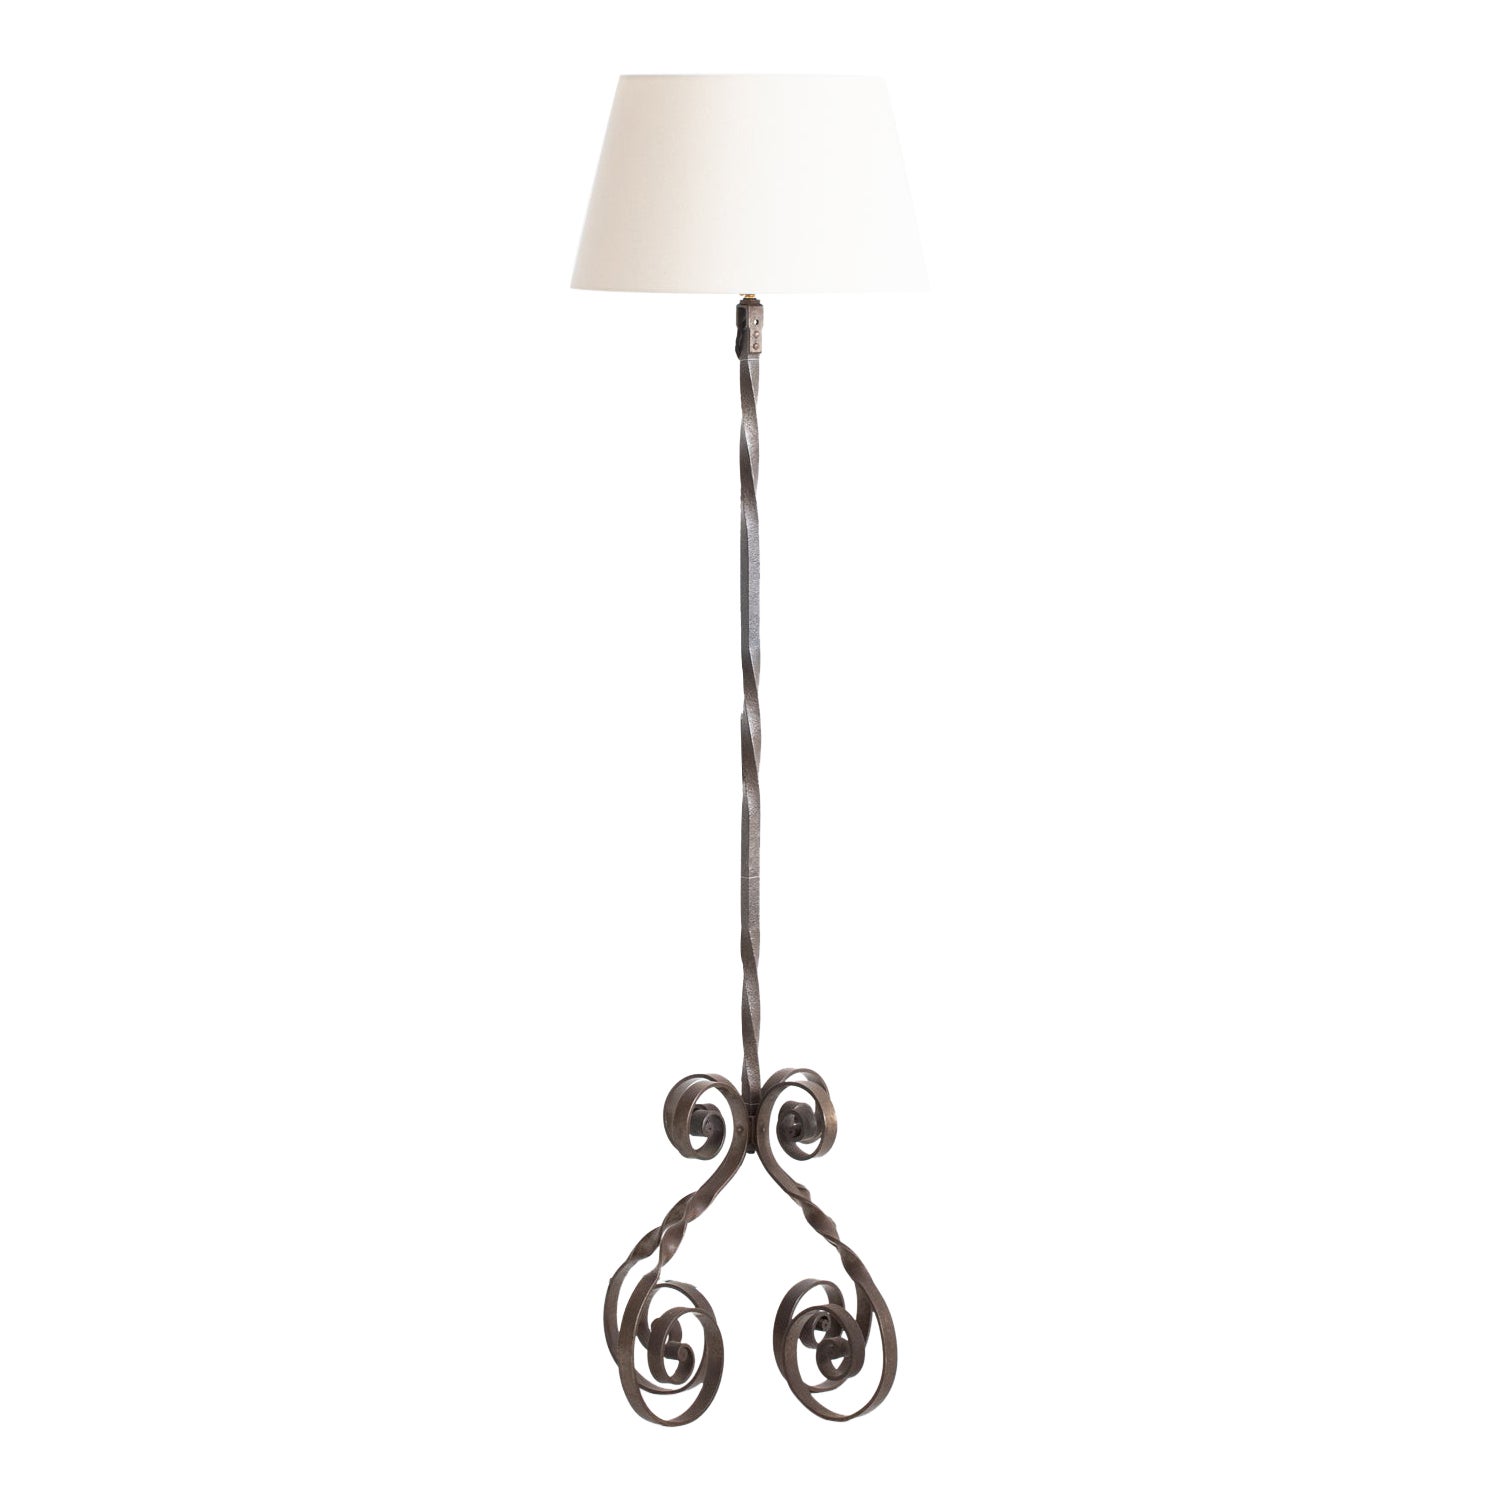 1960s French Wrought Iron Floor Lamp For Sale